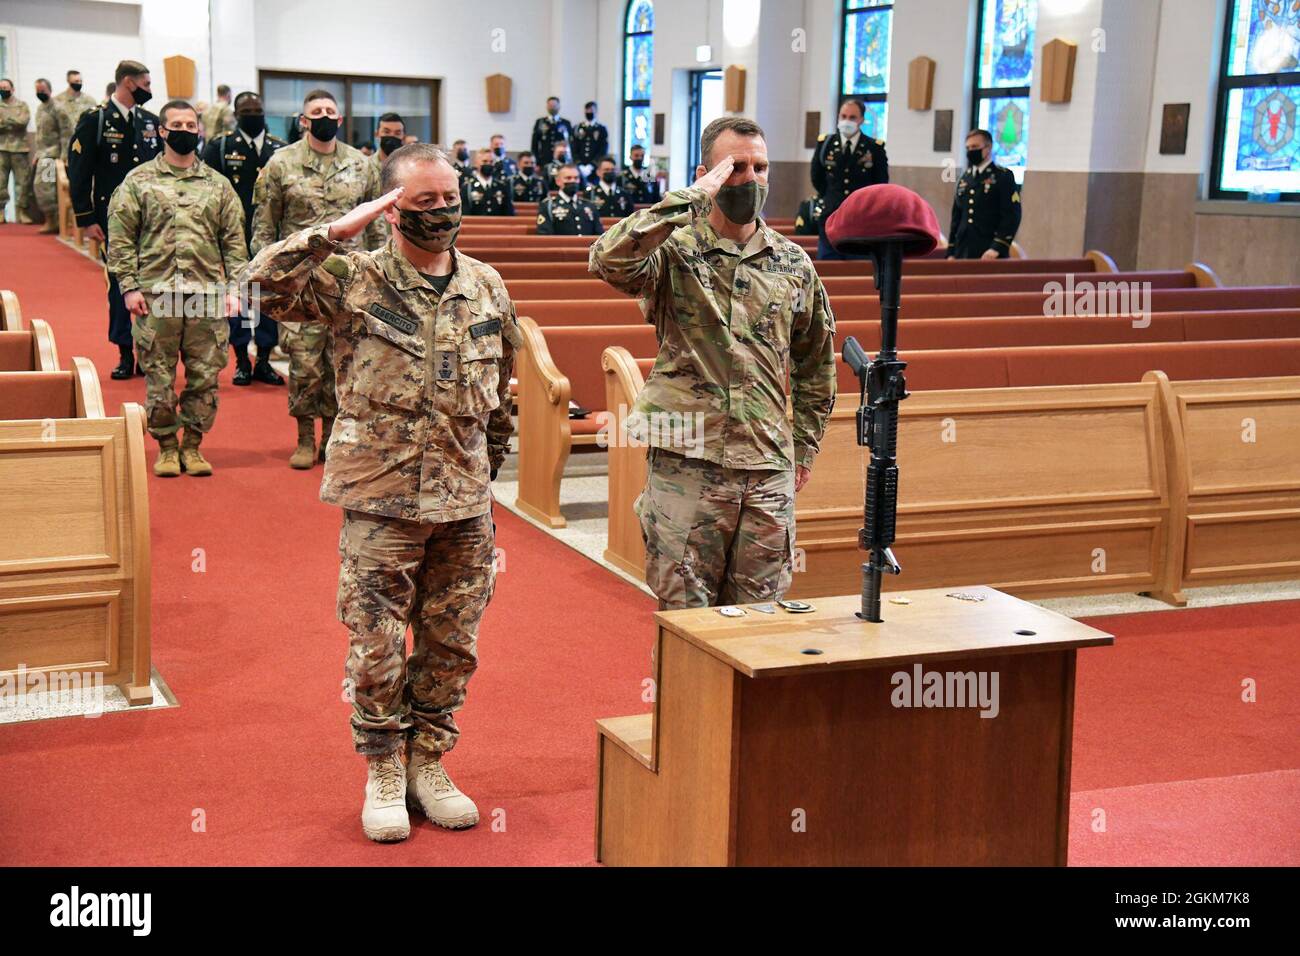 Italian Army Lt. Col. Giorgio Buonaiuto, left, and Lt. Col. Jason R. Wayne Deputy Commander of the 173rd Airborne Brigade, right, salute Pfc. Ian N. Morosoff, who died May 1 from injuries sustained in a car accident, Caserma Ederle, Vicenza, Italy, May 24, 2021. Stock Photo